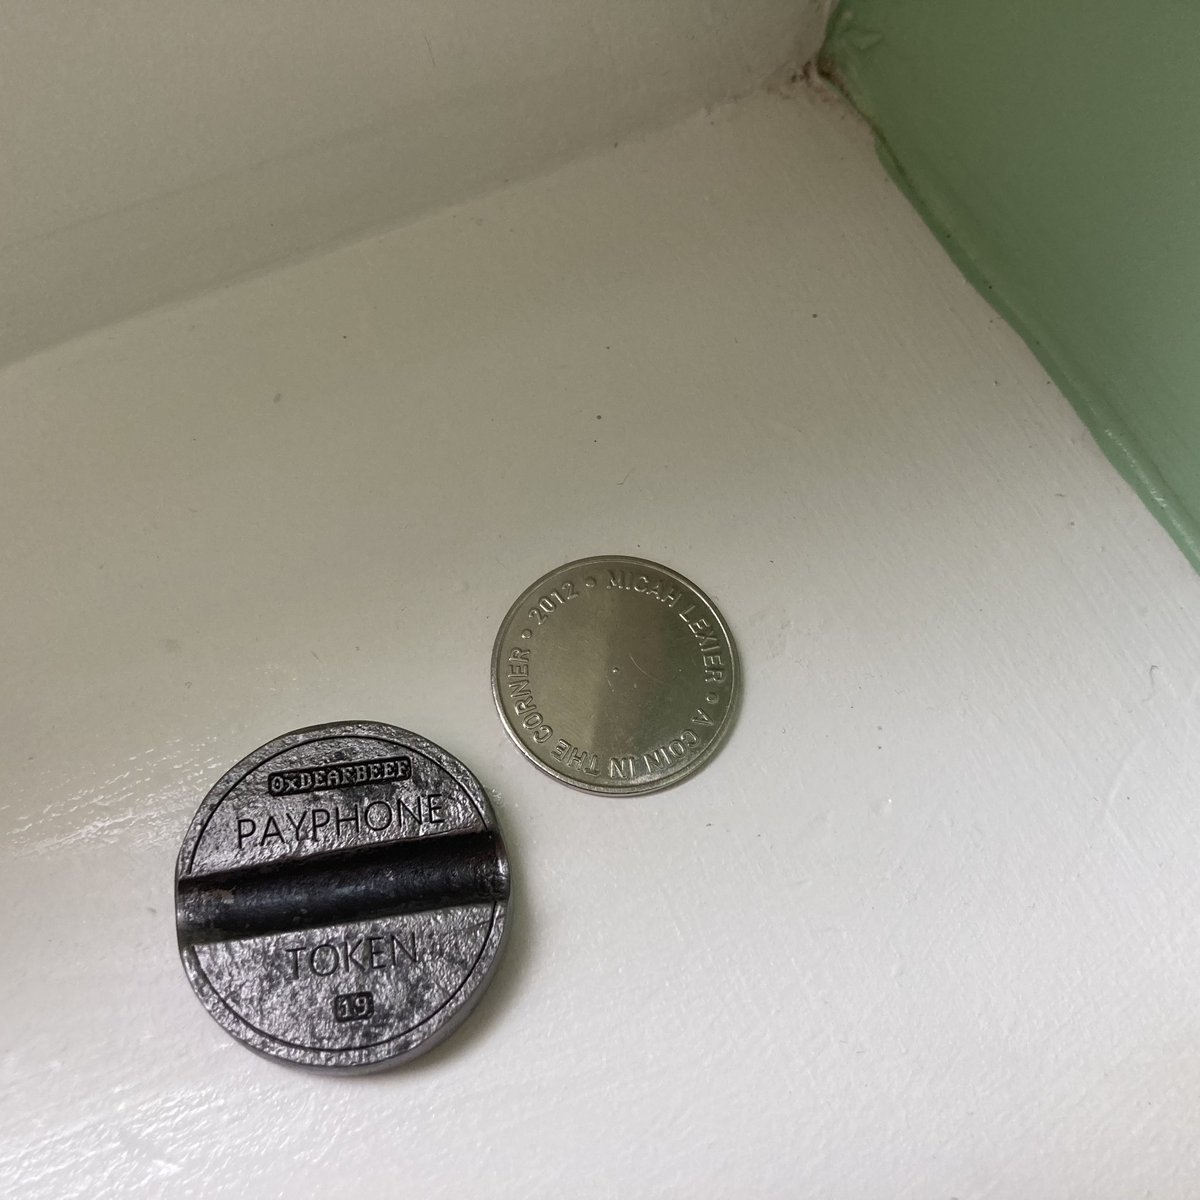 Payphone Token by @_deafbeef , 2024; “A Coin In The Corner” by Micah Lexier, 2012 The first “minted” artwork I ever acquired, and the most recent. Together at last in an inconspicuous corner of my house.